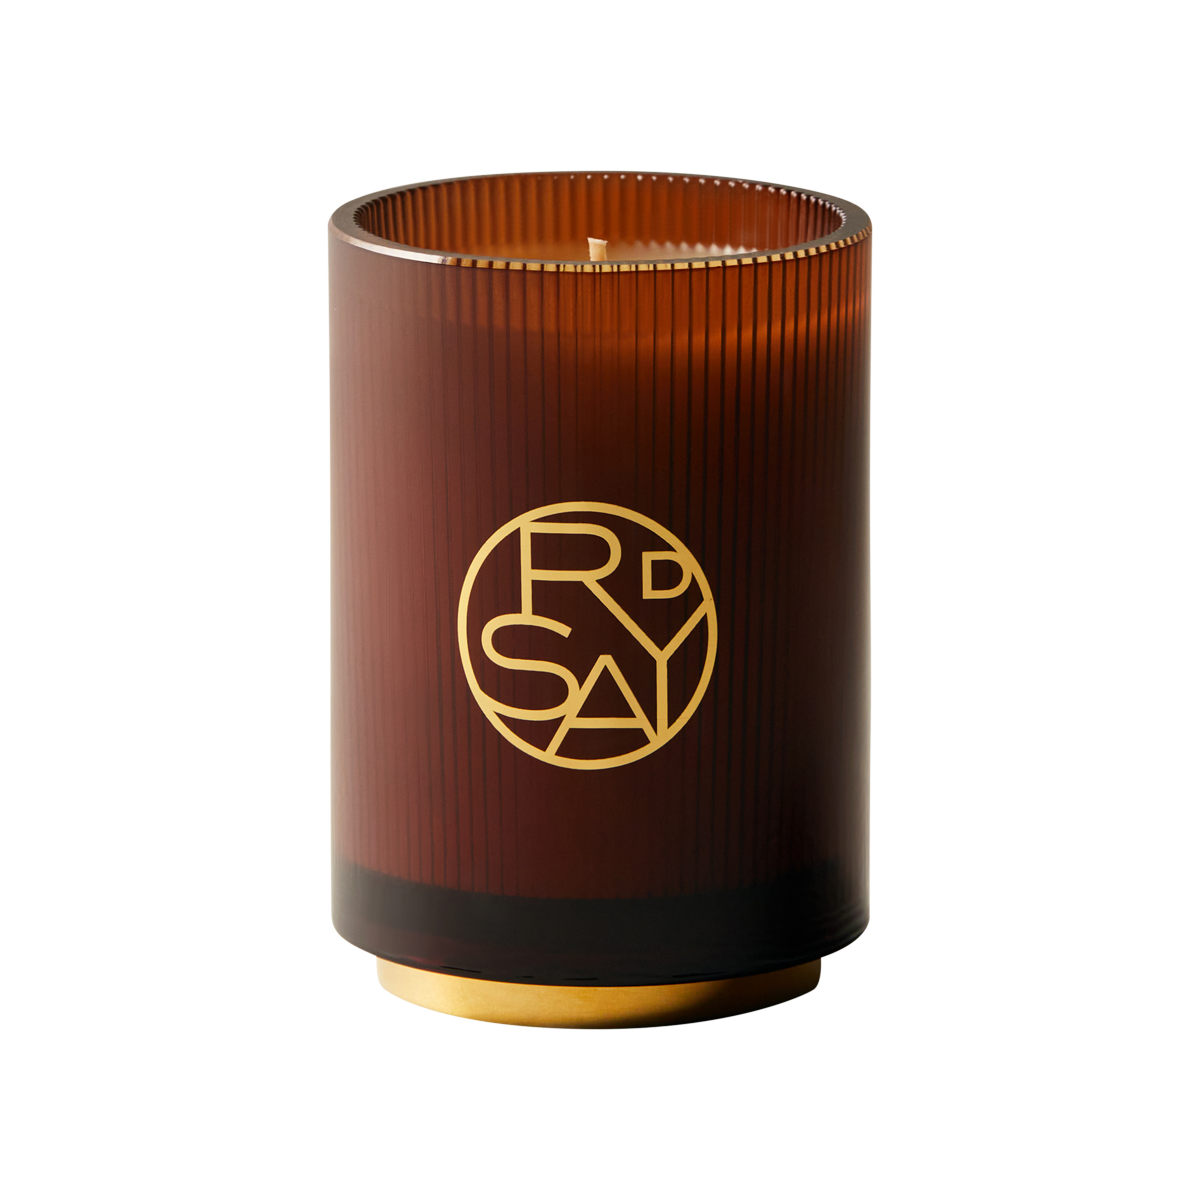 D'Orsay - Scented Candle 23:15